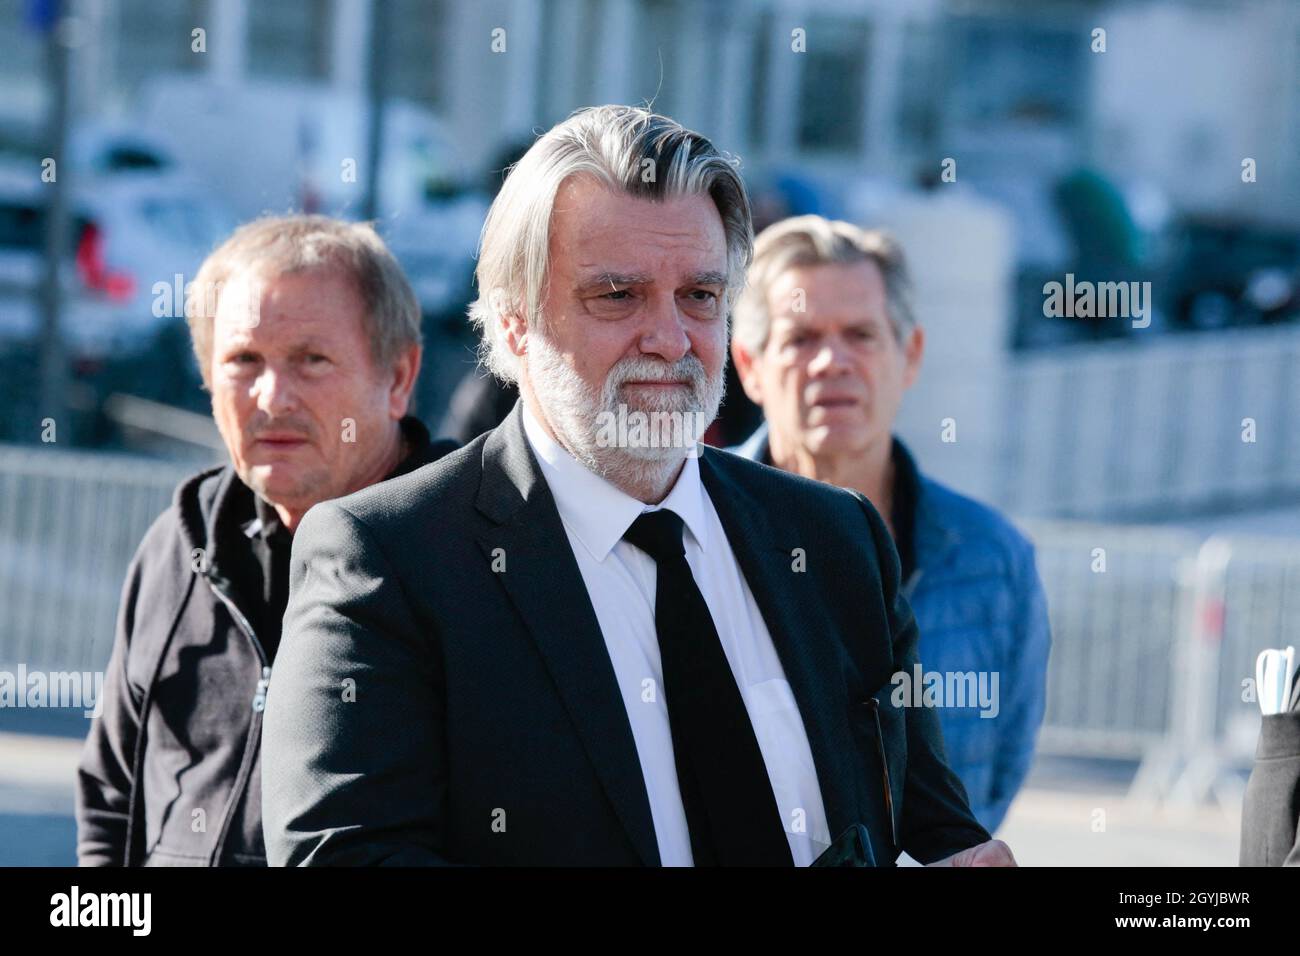 Marseille, France. 08th Oct, 2021. Guest arrives at funeral mass dedicated  to Bernard Tapie, the French business magnate, actor and politician, at the  Major cathedrol in Marseille, southeastern France, on October 8,